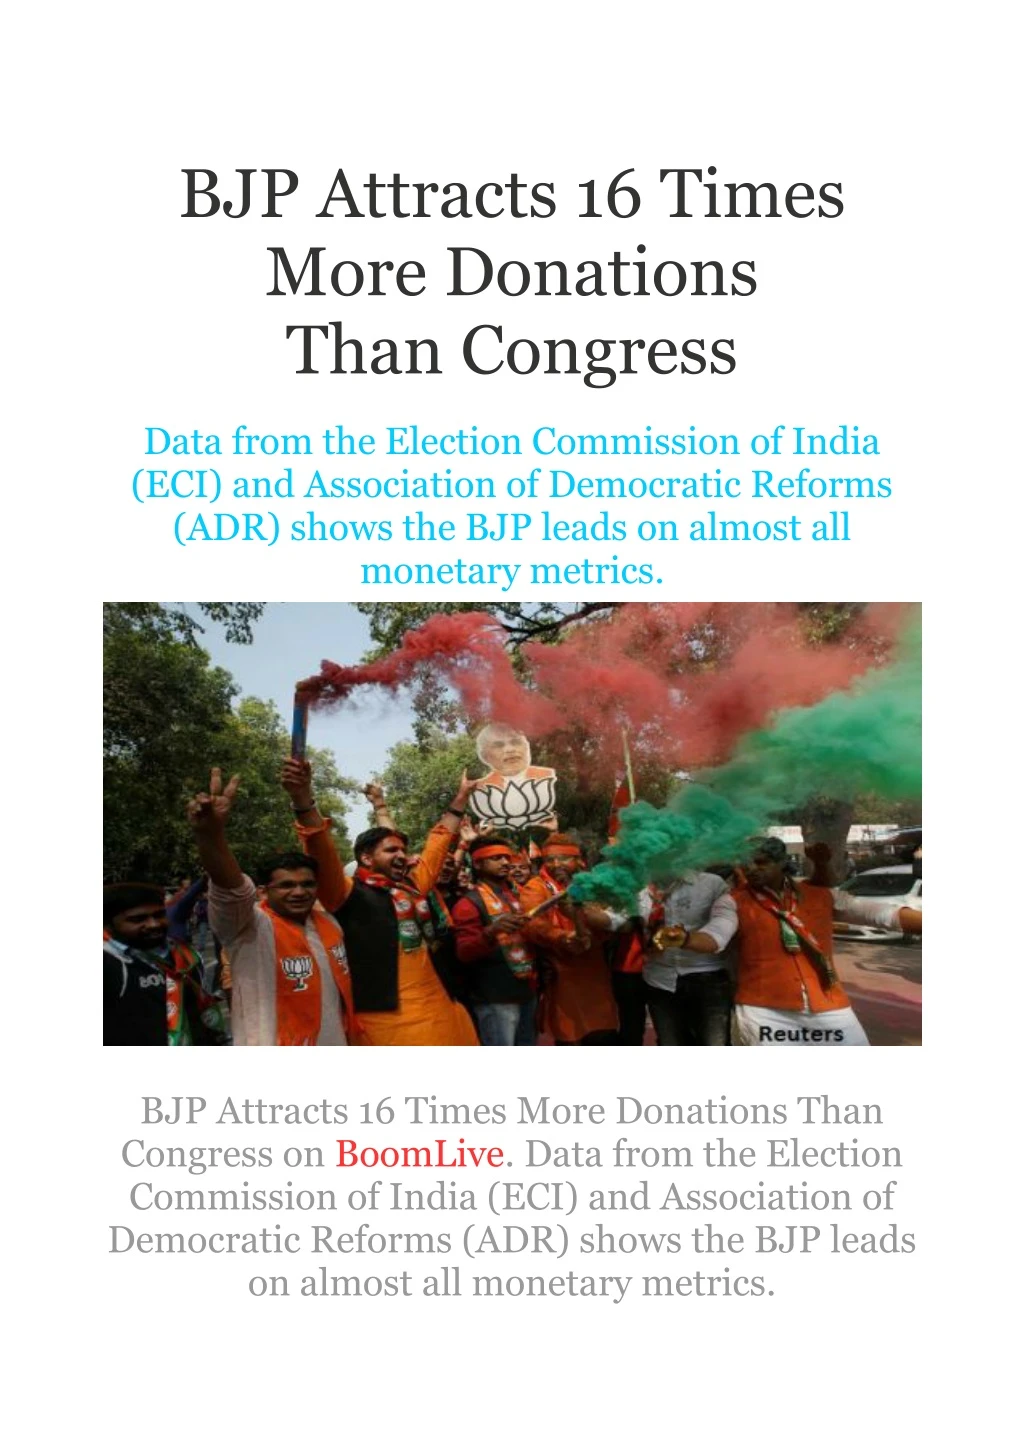 bjp attracts 16 times more donations than congress